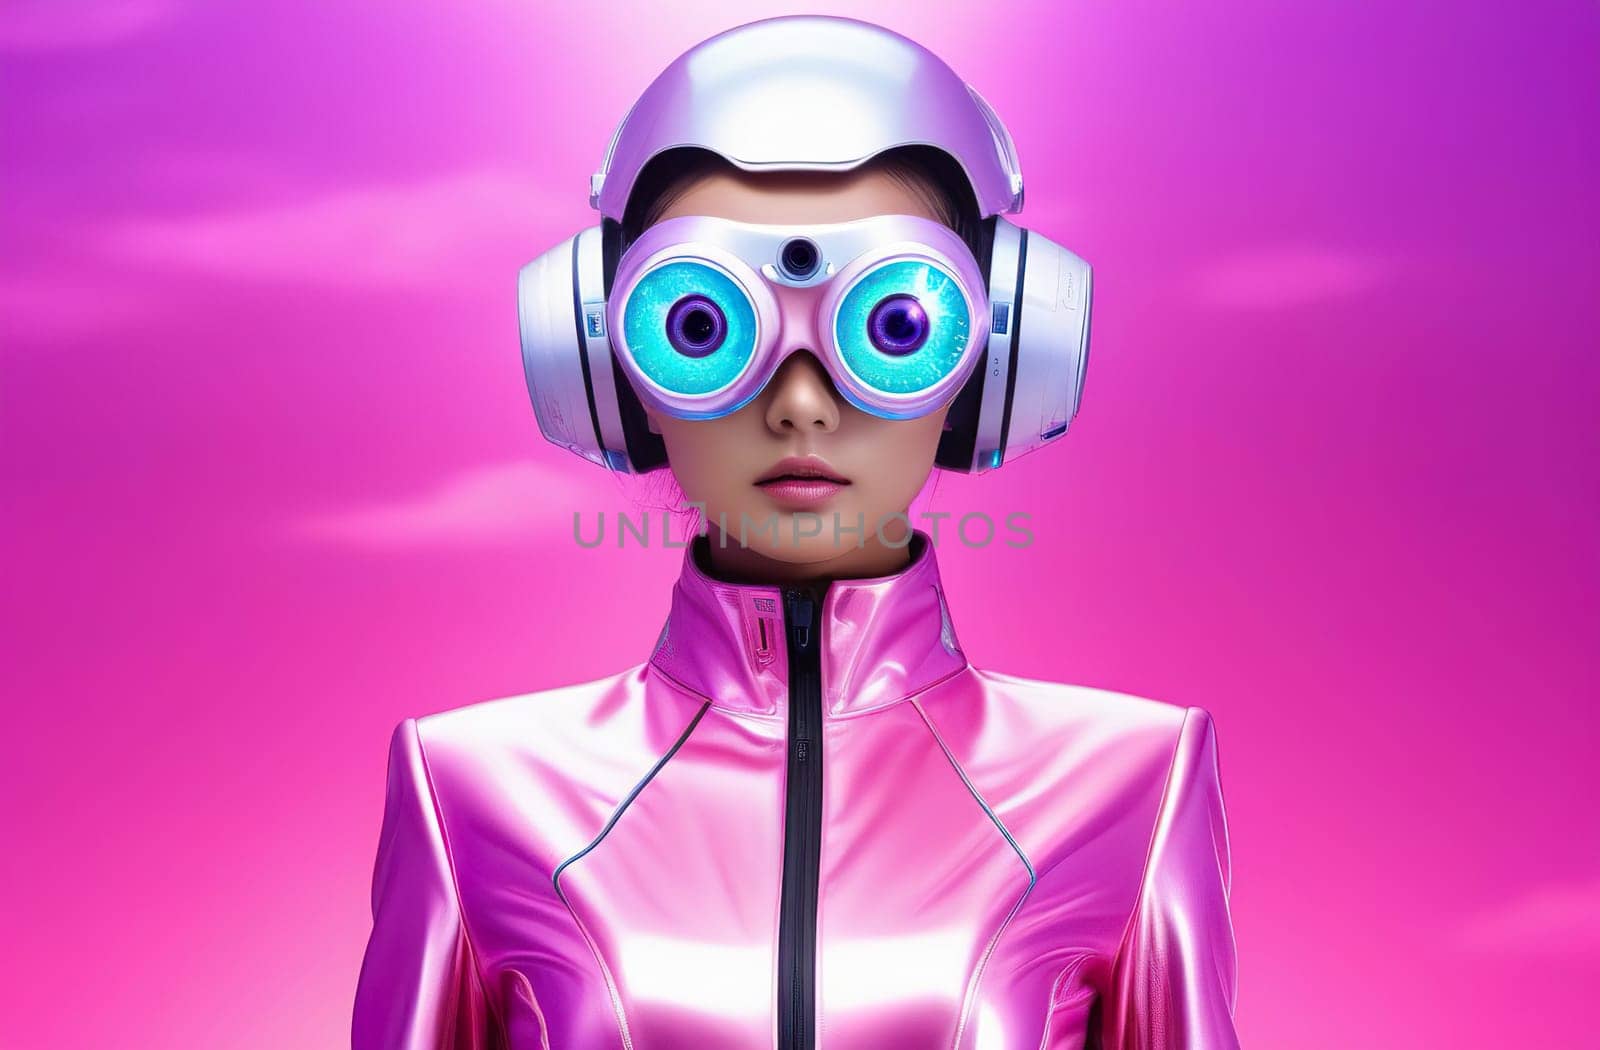 Concept of the future. Portrait of a girl in neon light wearing neon glasses on a futuristic neon pink and lilac background. Bright style, beauty concept. by Proxima13